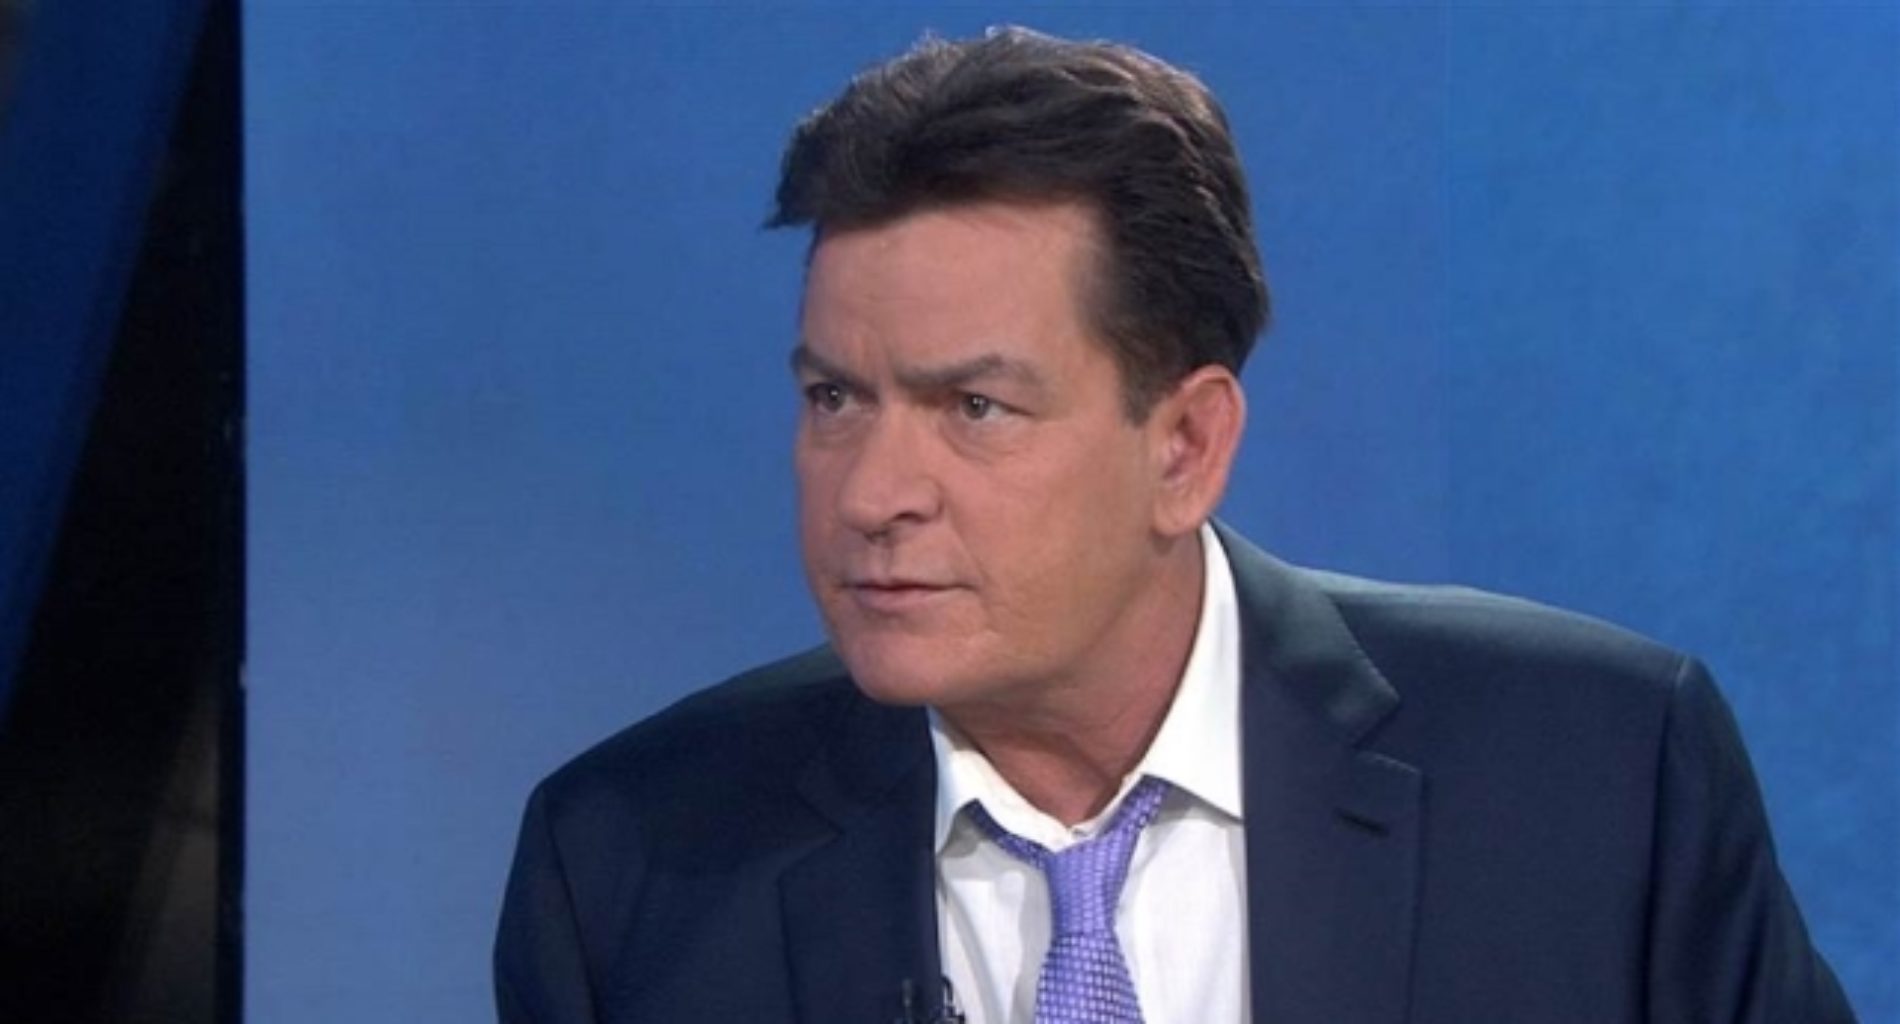 Charlie Sheen says there are other Hollywood stars who are HIV-positive but keeping it secret